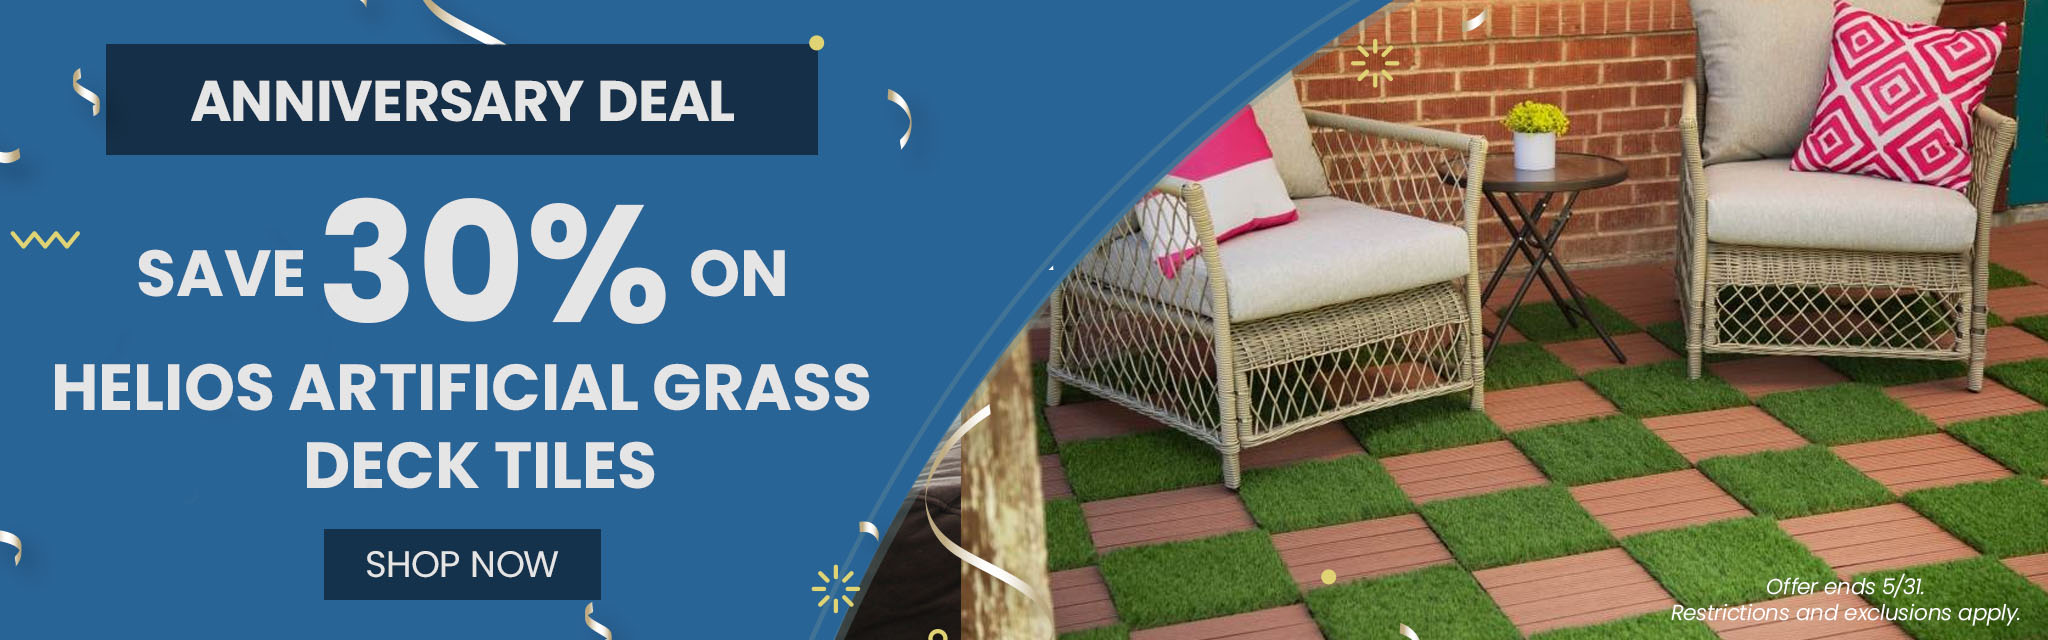 Anniversary Deal | Save 30%* On  Helios Artificial Grass Deck Tiles CTA: Shop Now Ends 5/31. Restrictions and exclusions apply. 